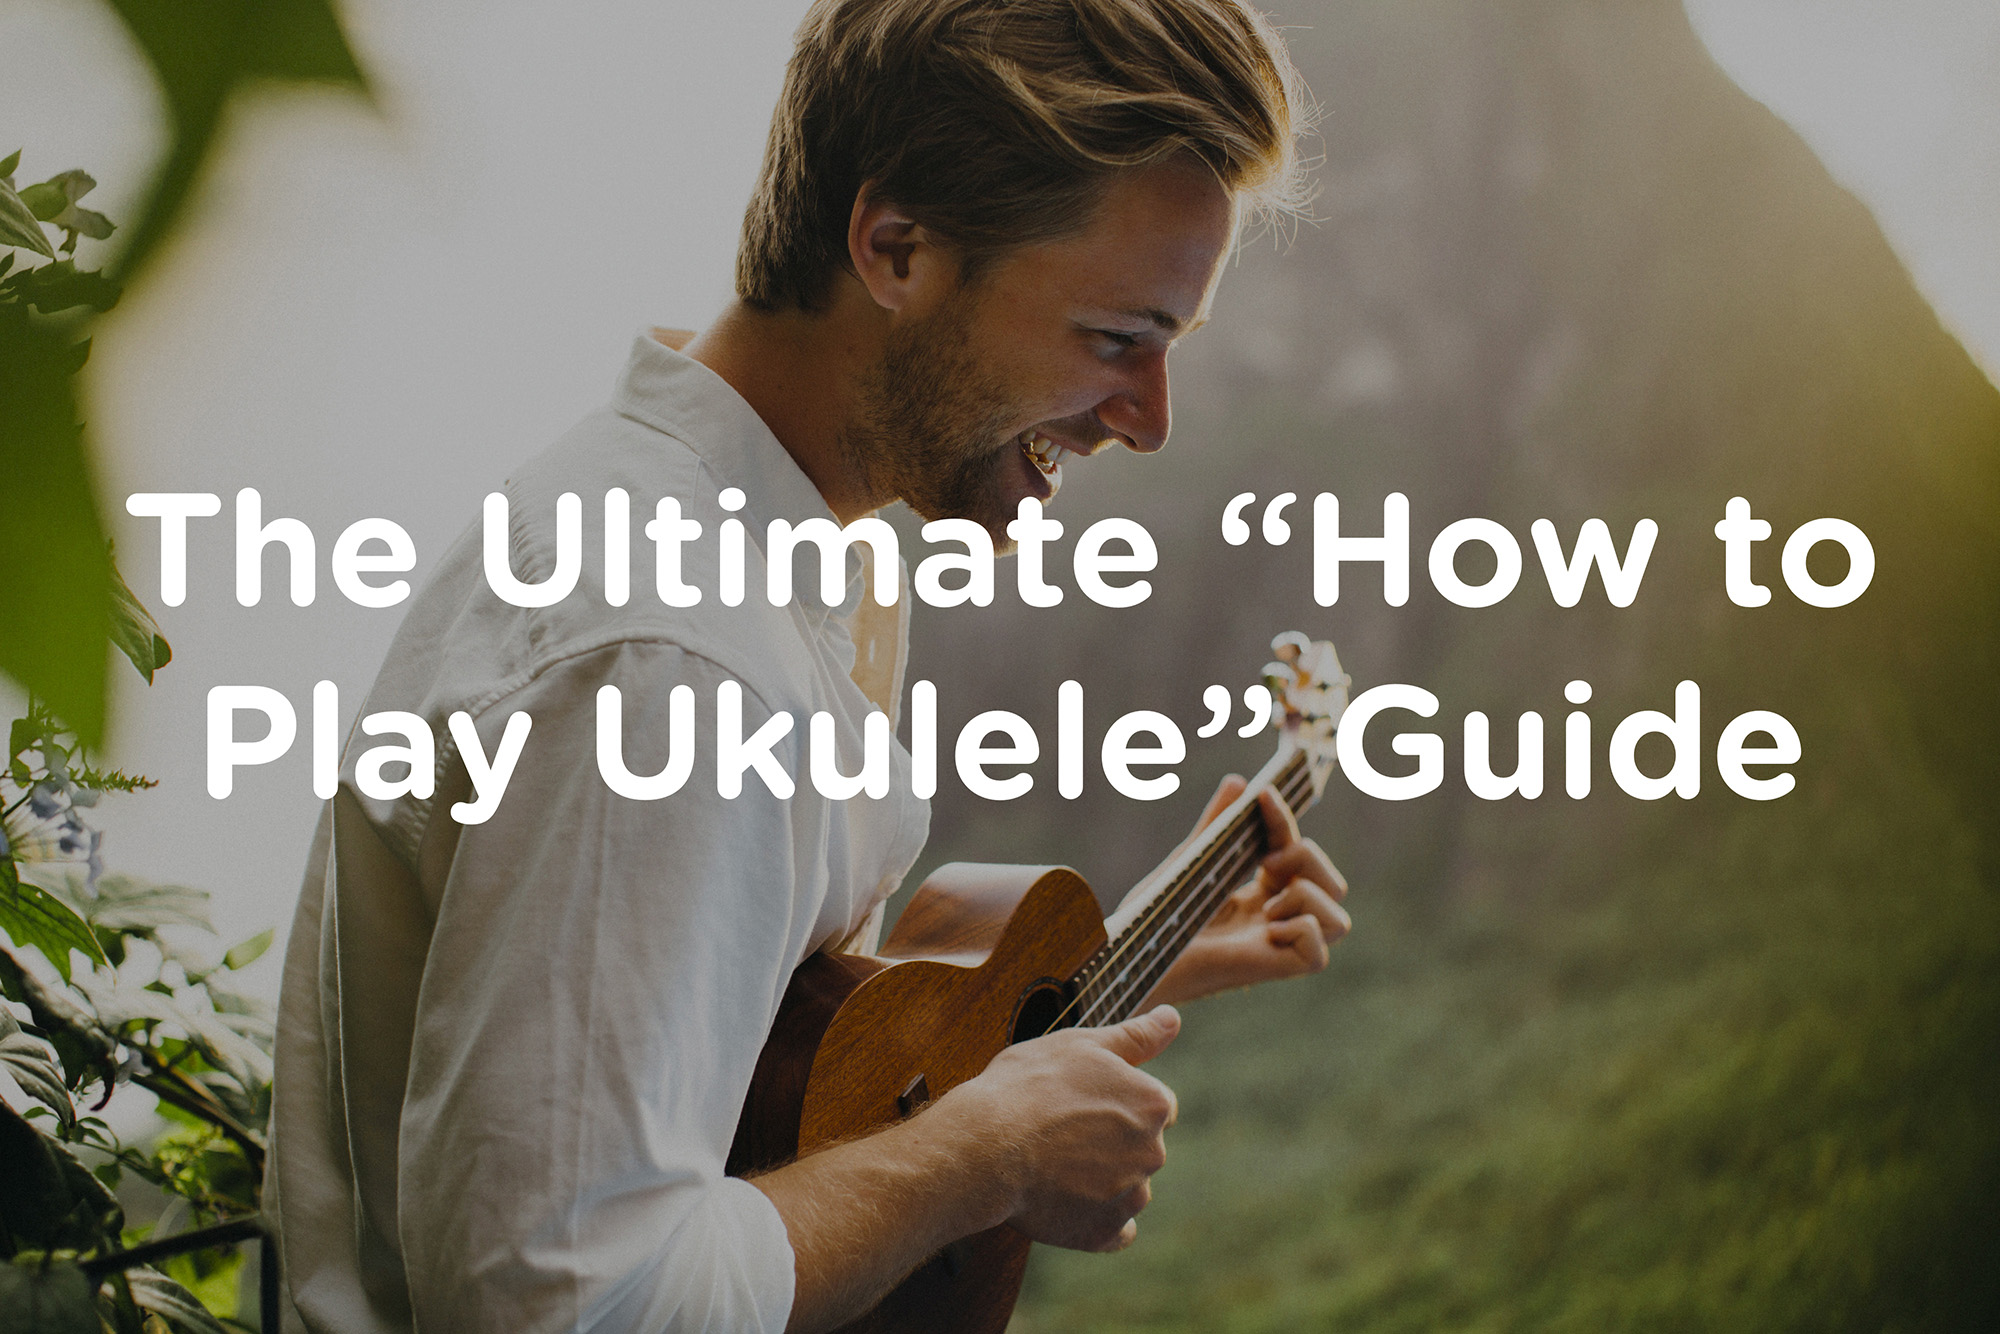 The Ultimate How to Play Ukulele Guide